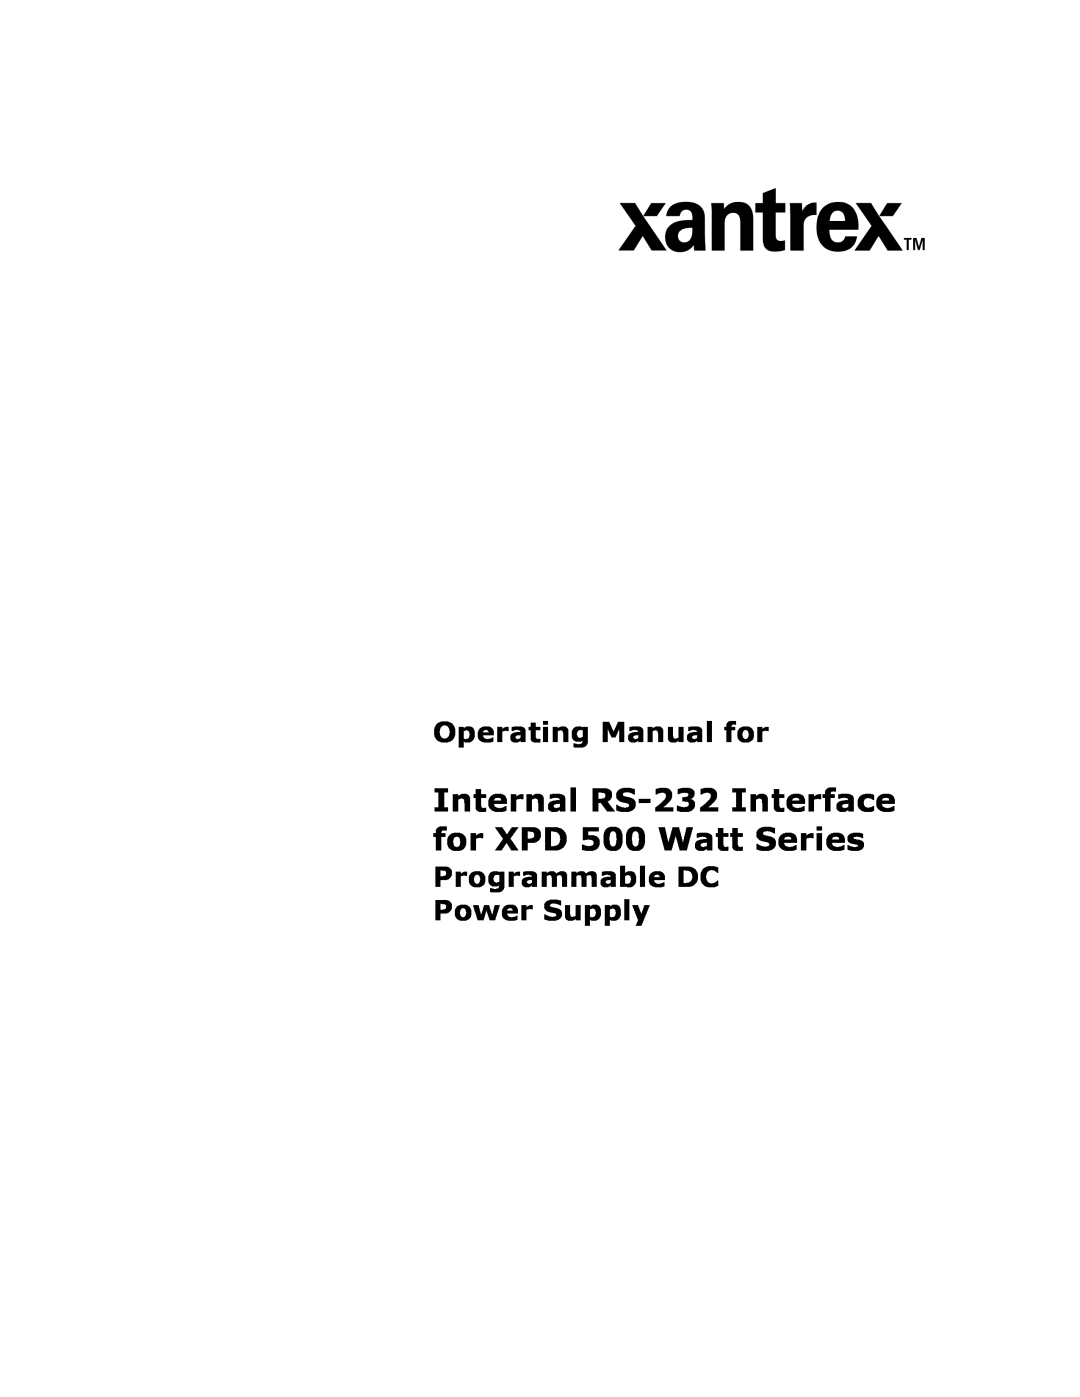 Xantrex Technology RS232-XPD manual Internal RS-232 Interface for XPD 500 Watt Series, Operating Manual for 